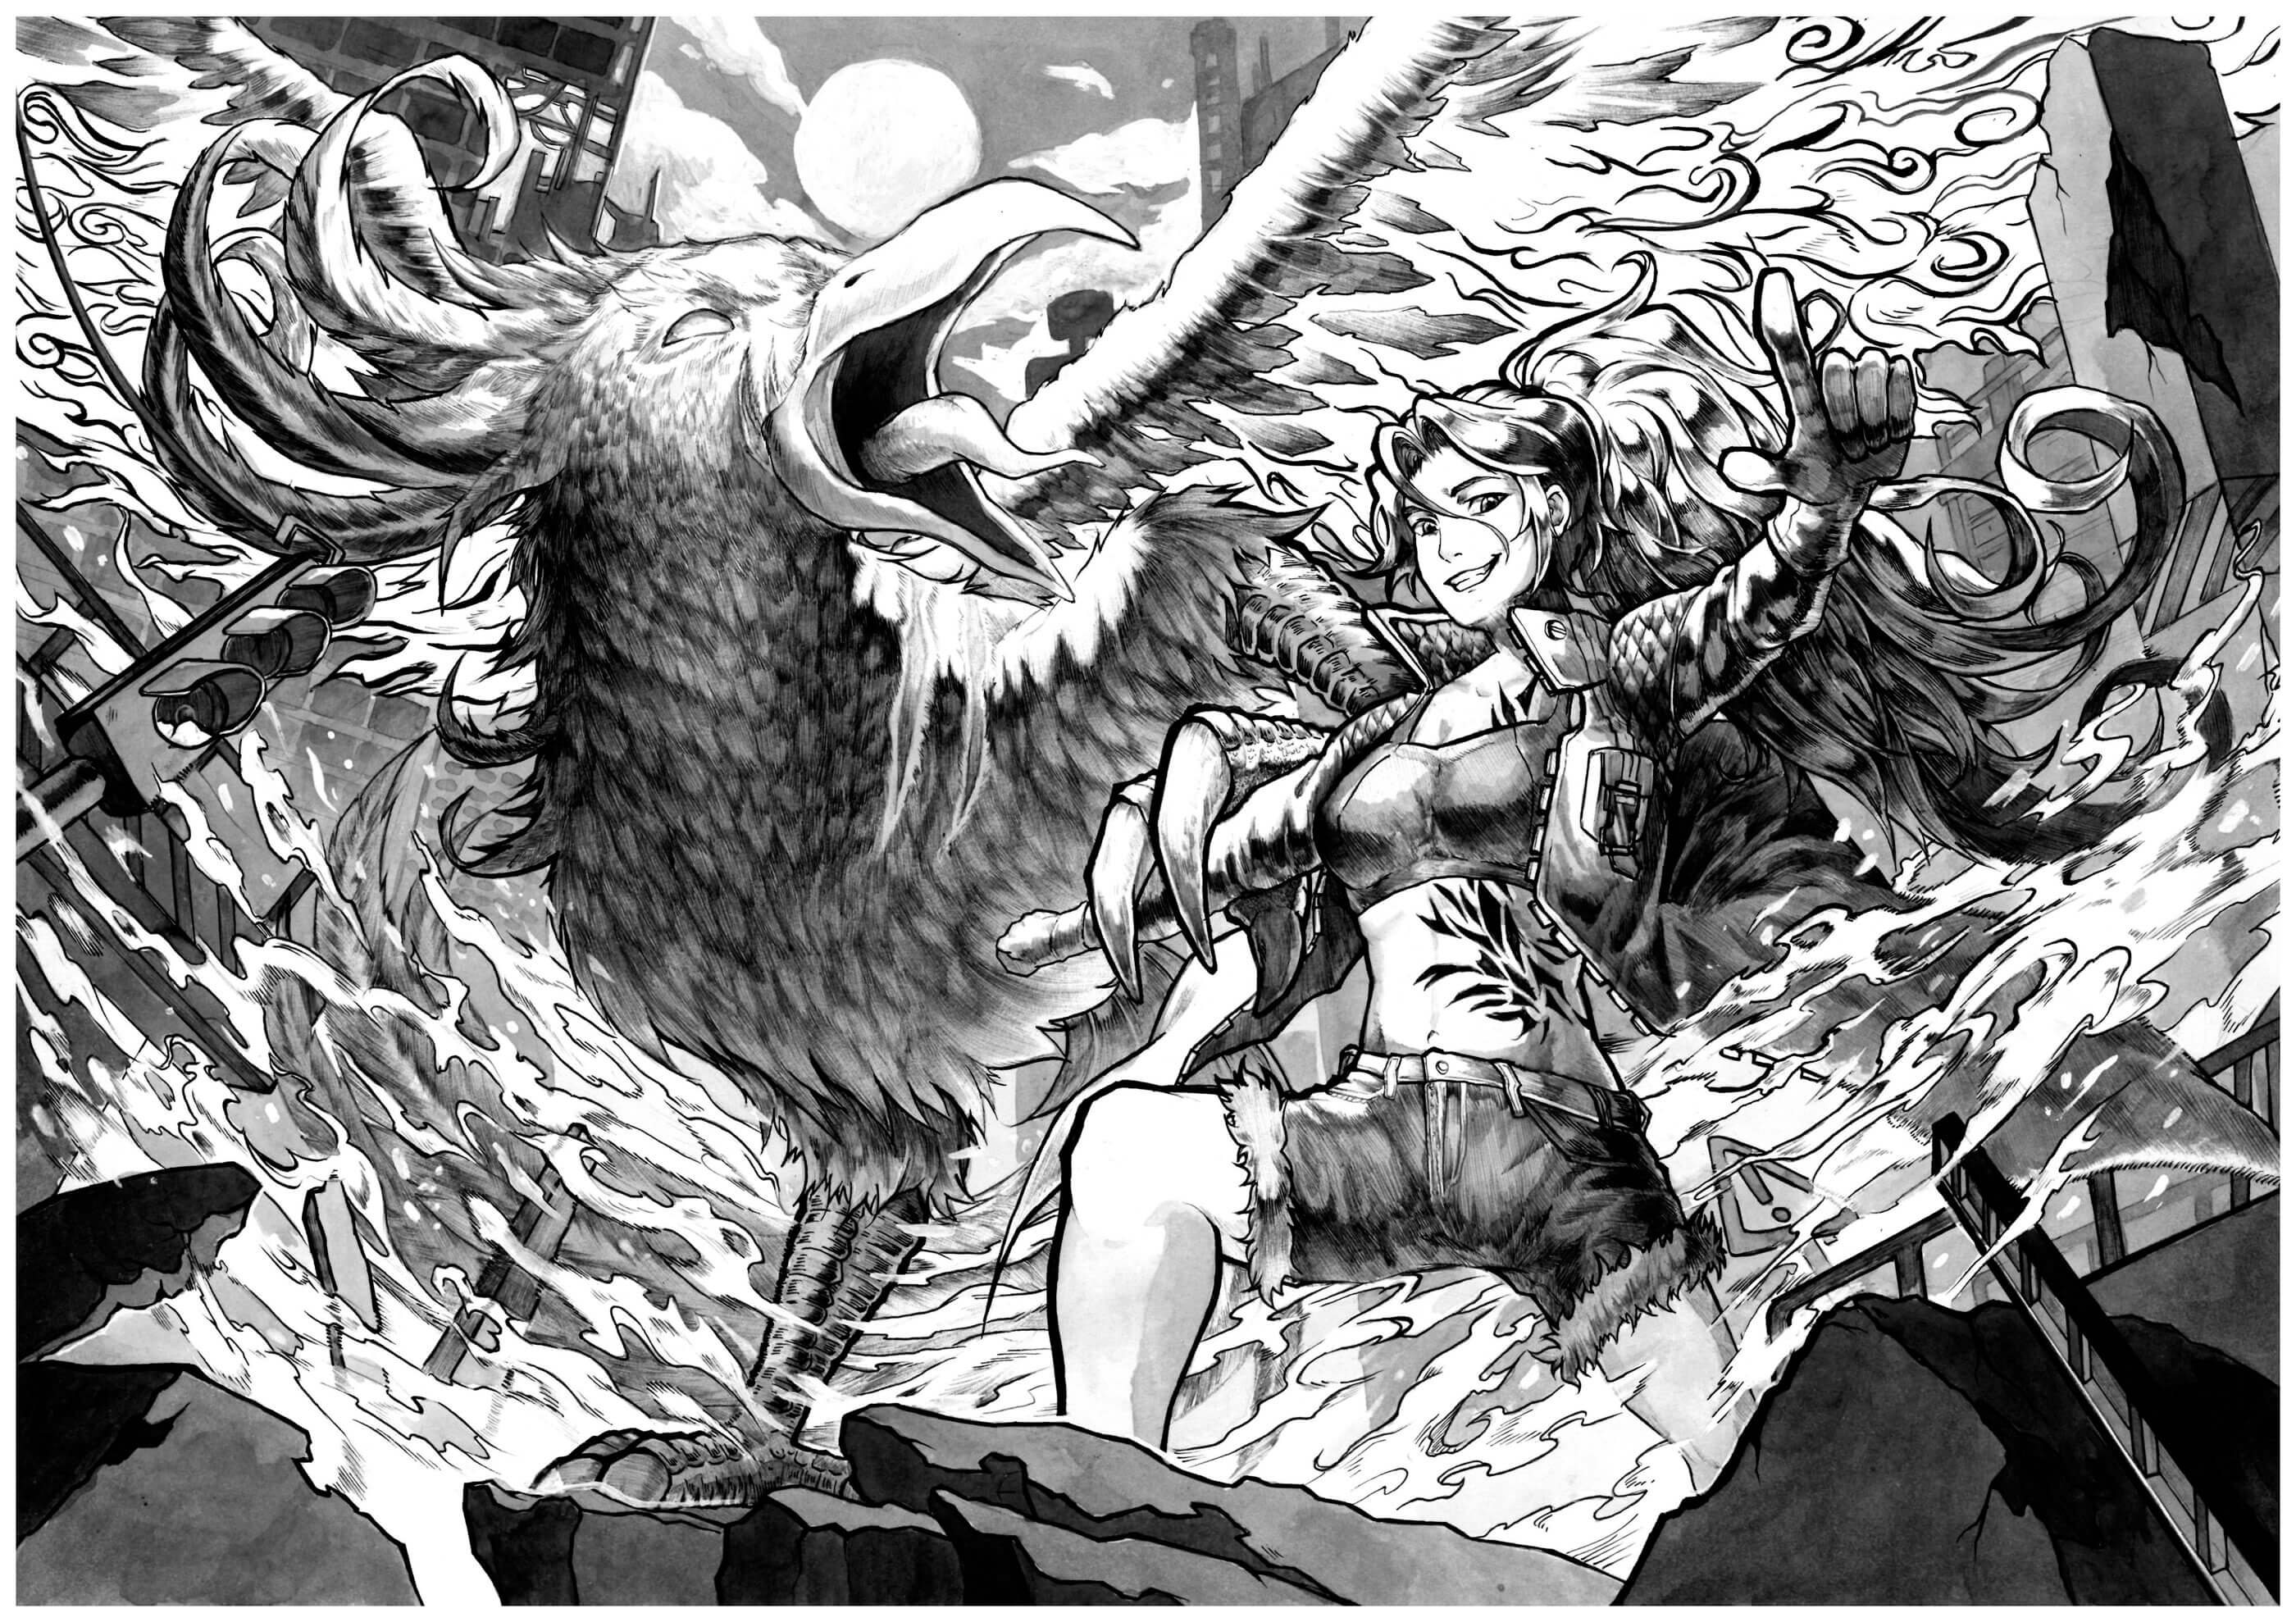 Black-and-White sketch of a woman posing with a griffon-like animal.